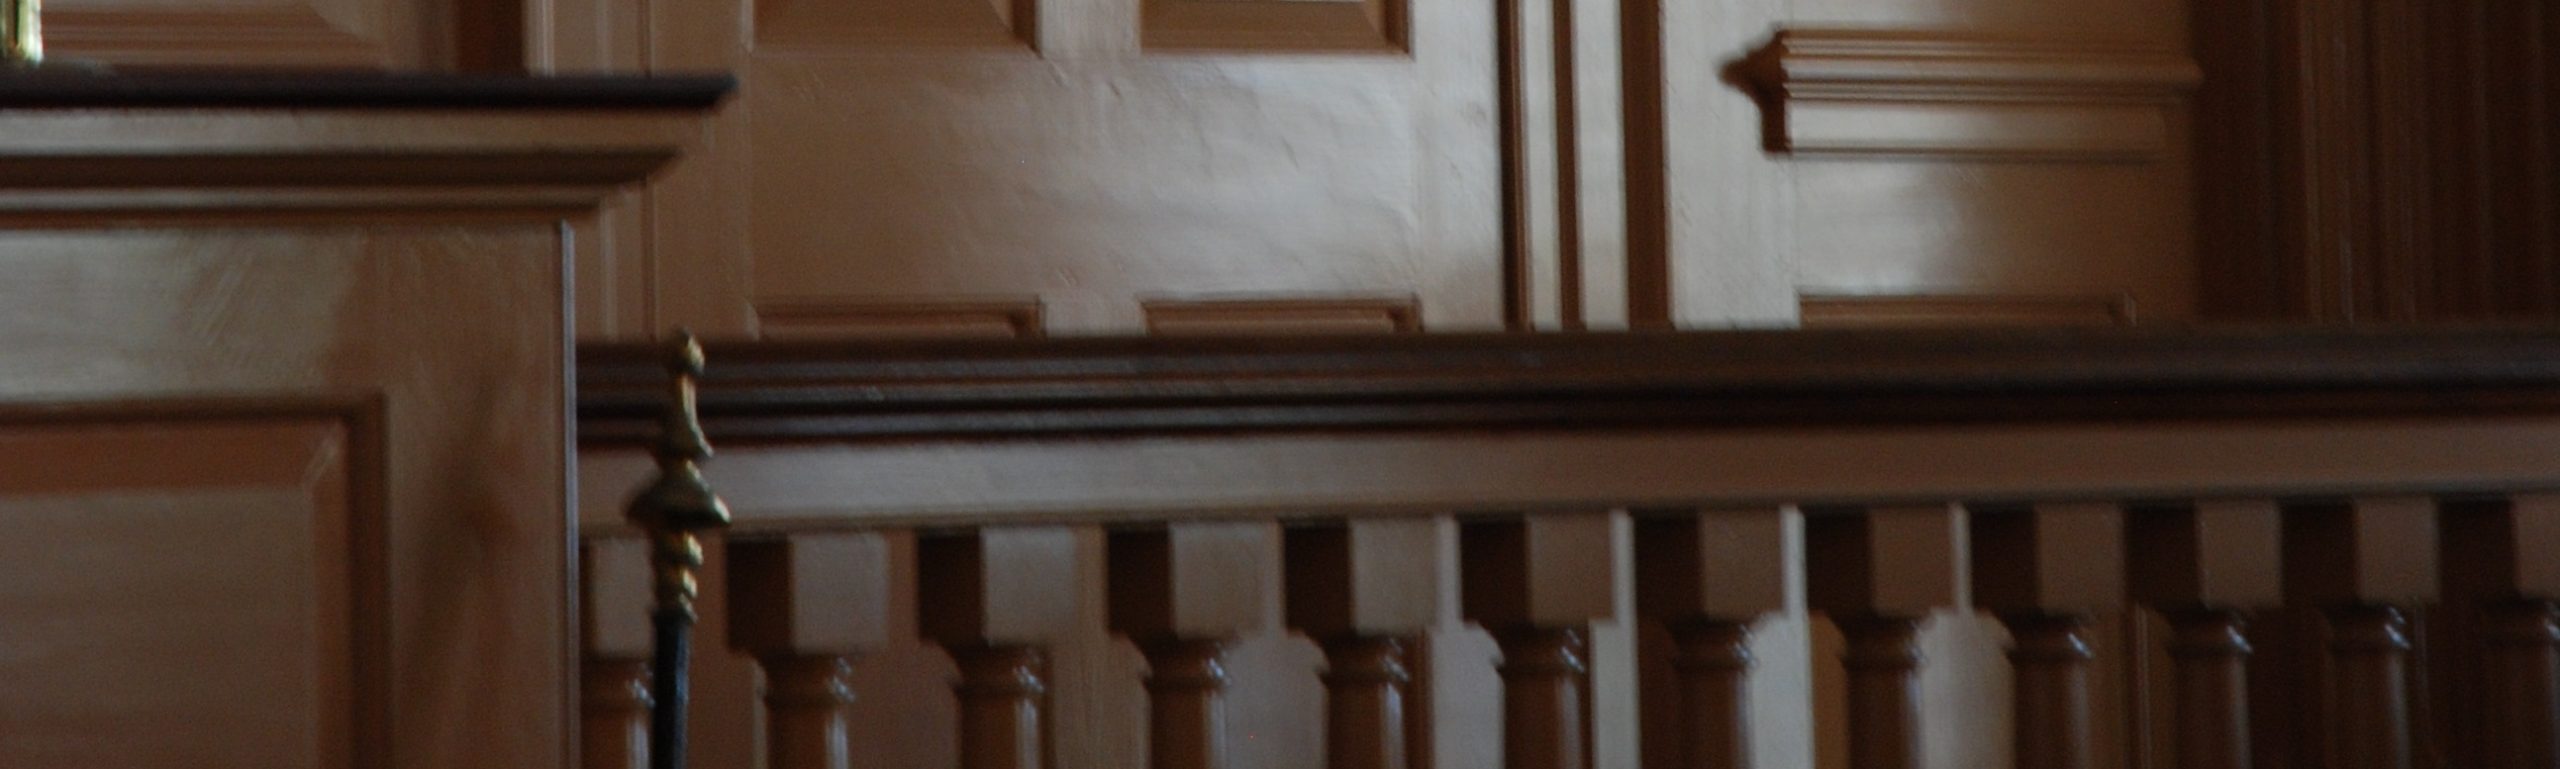 A Wooden Frame With Walls in a Court Room